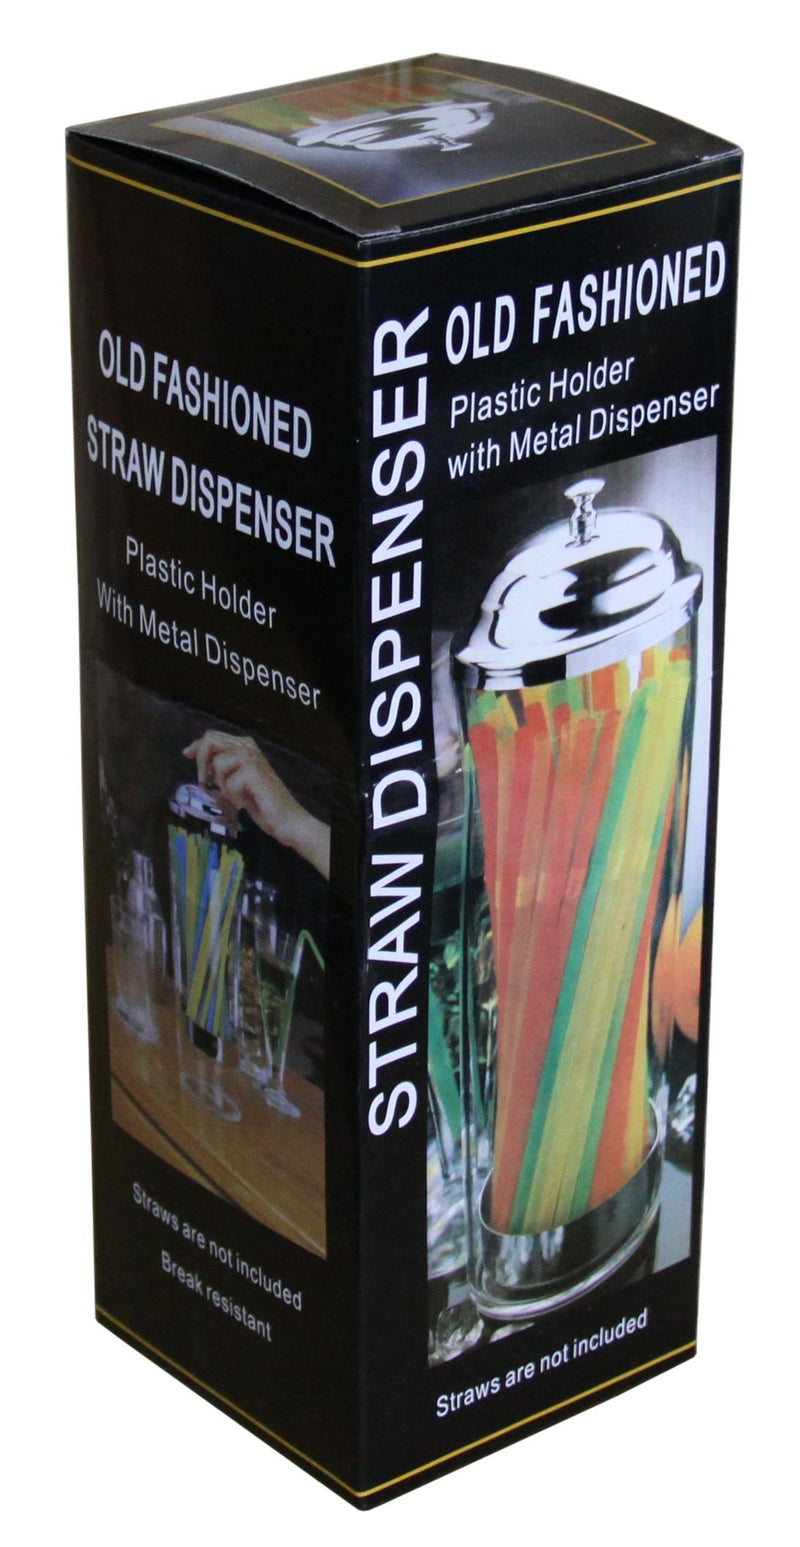 NewNest Australia - New Star Foodservice 26641 Stainless Steel Straw Dispenser, 3.5-Inch by 10.6-Inch, Clear 